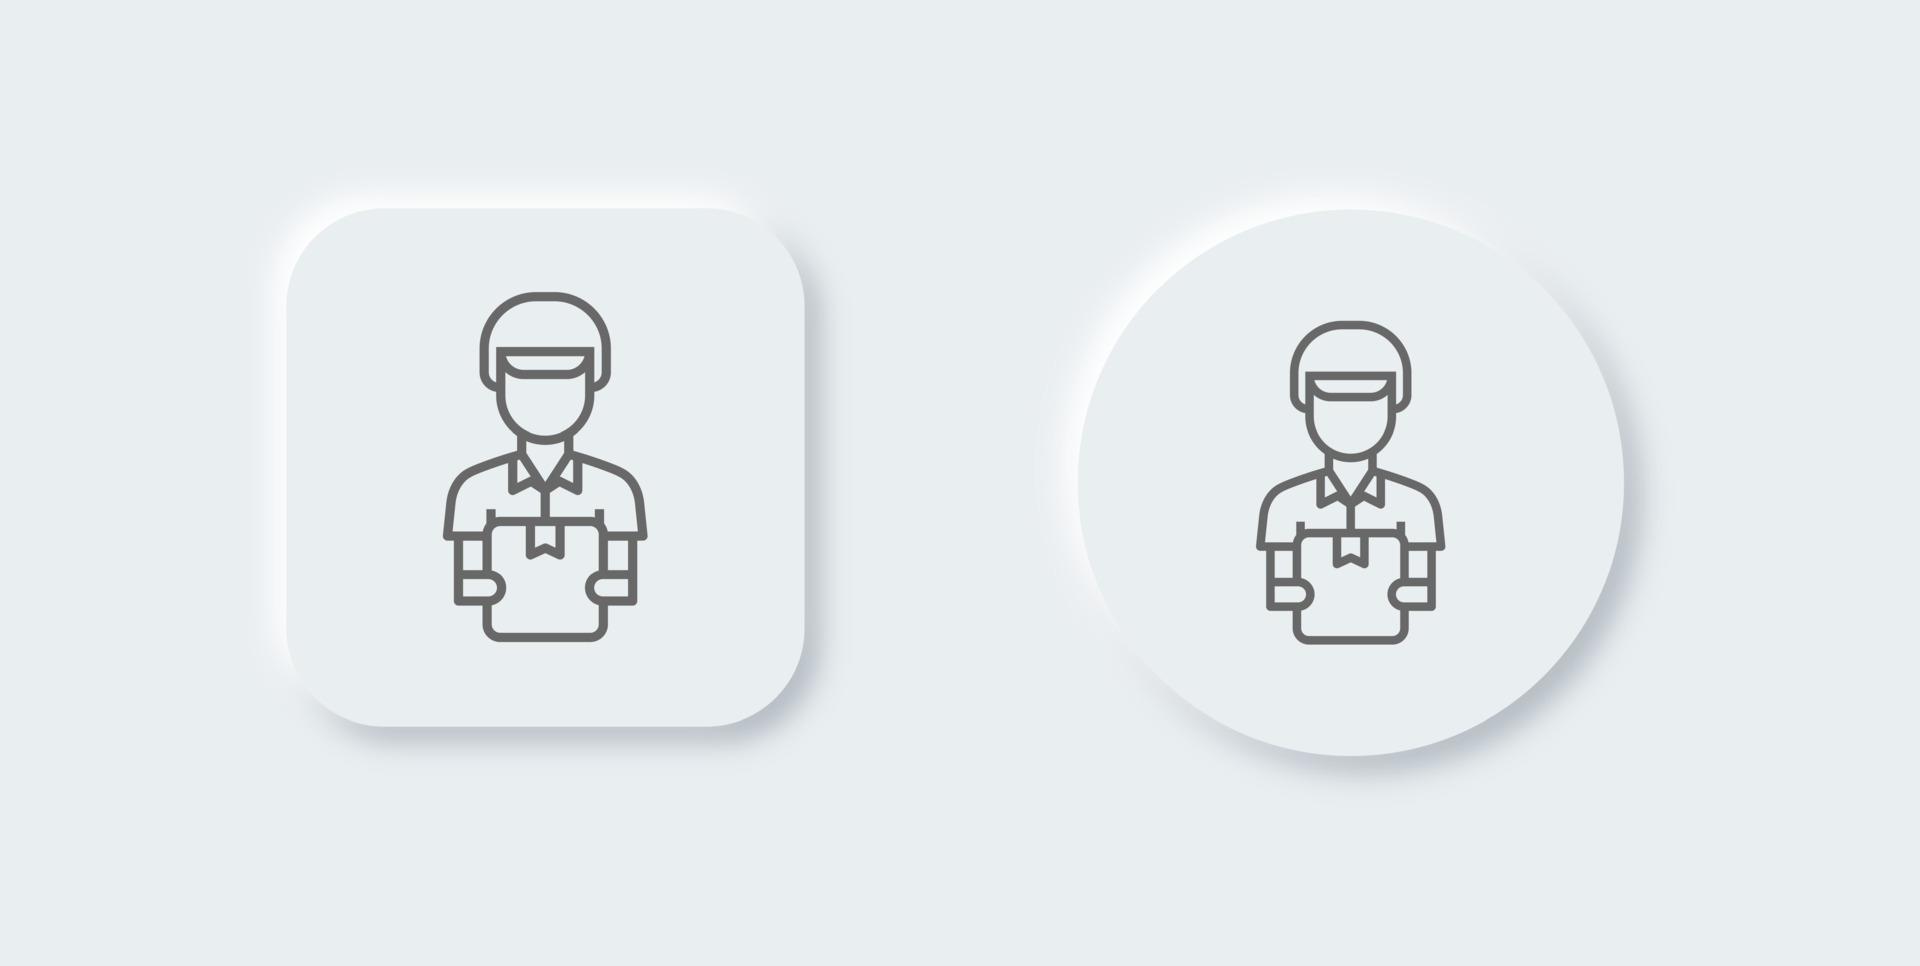 Courier line icon in neomorphic design style. Delivery man signs vector illustration.